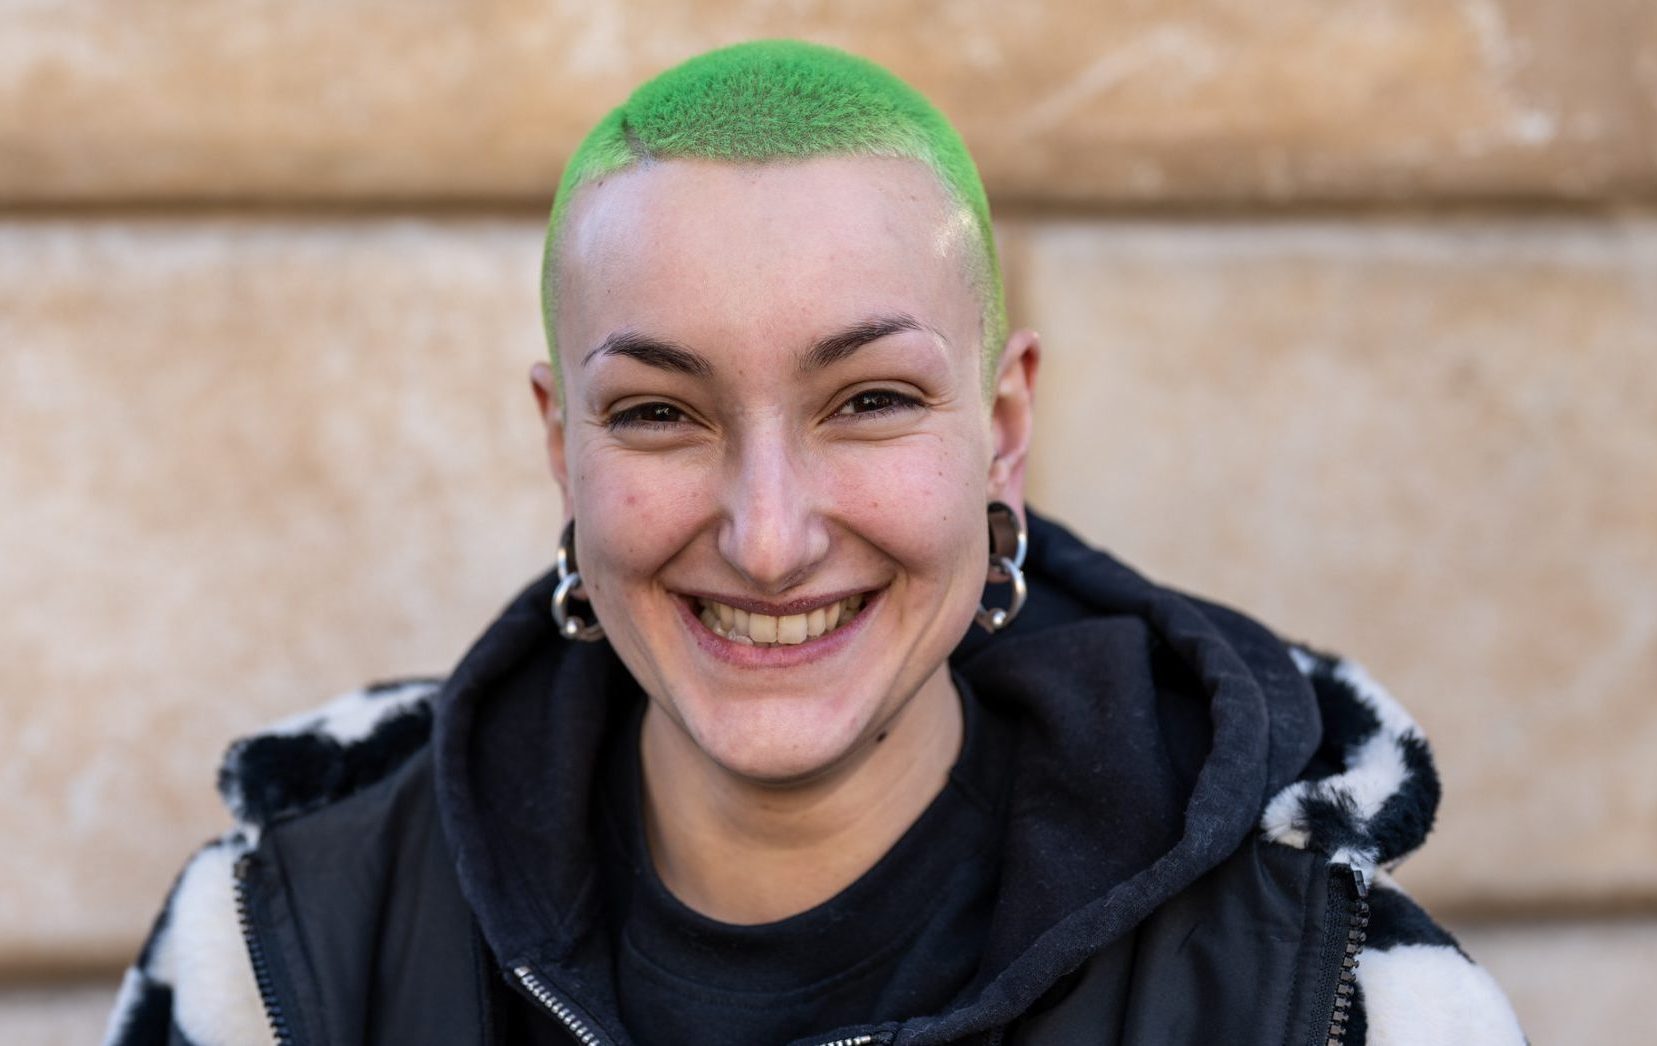 A smiling woman with cropped green hair